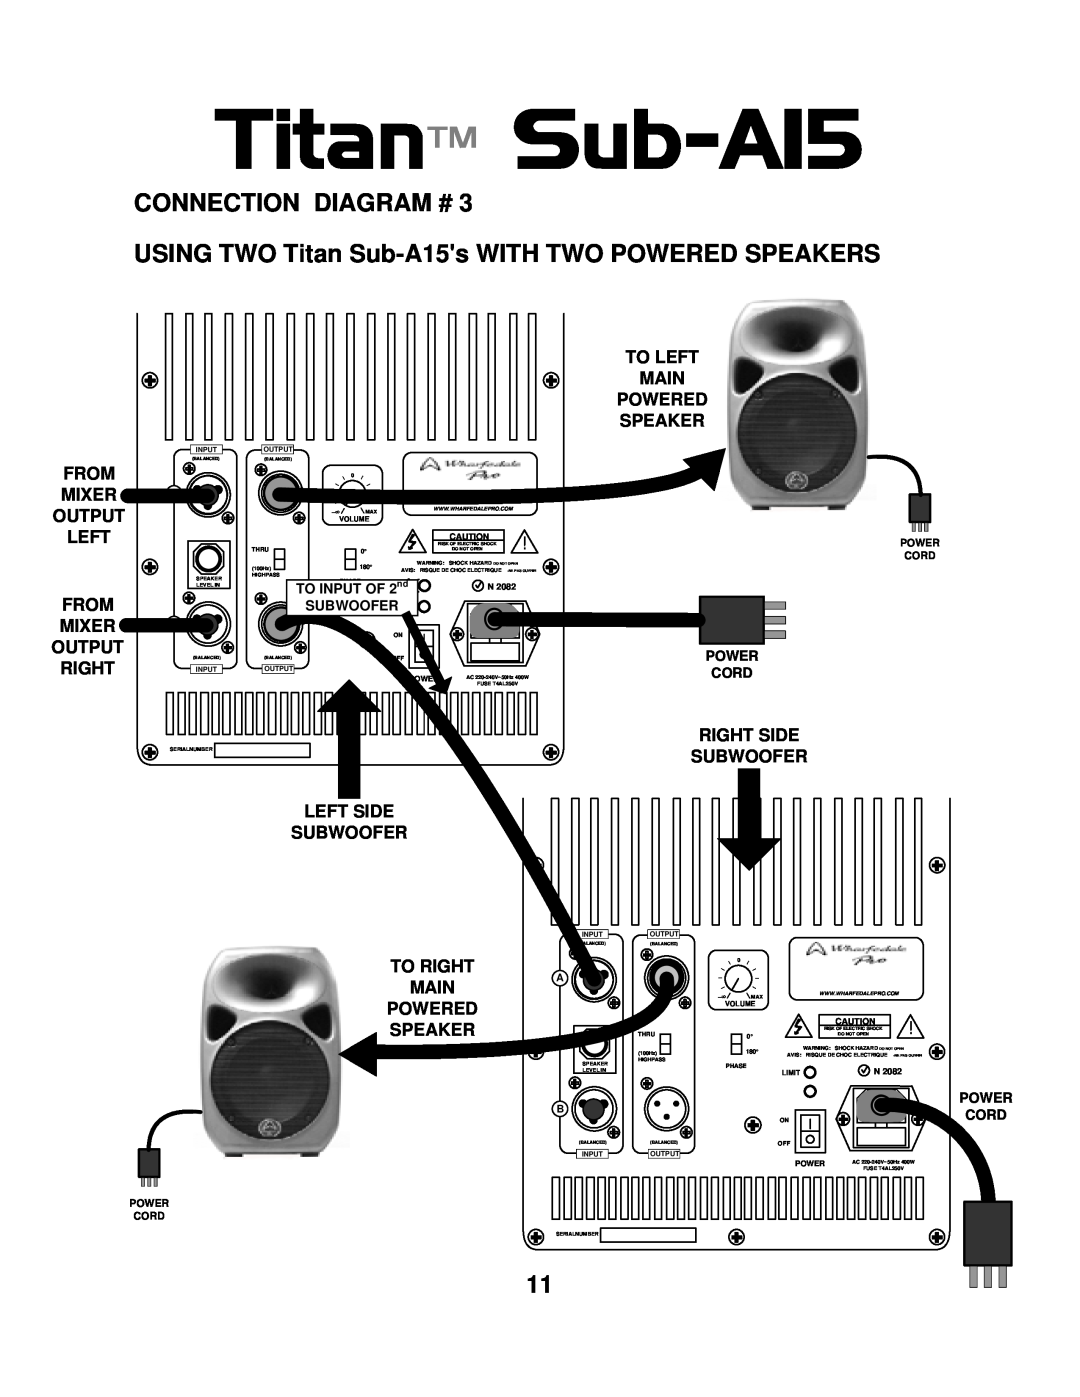 Wharfedale Sub A15 USING TWO Titan Sub-A15sWITH TWO POWERED SPEAKERS, Connection Diagram #, From Mixer A Output Left, Thru 